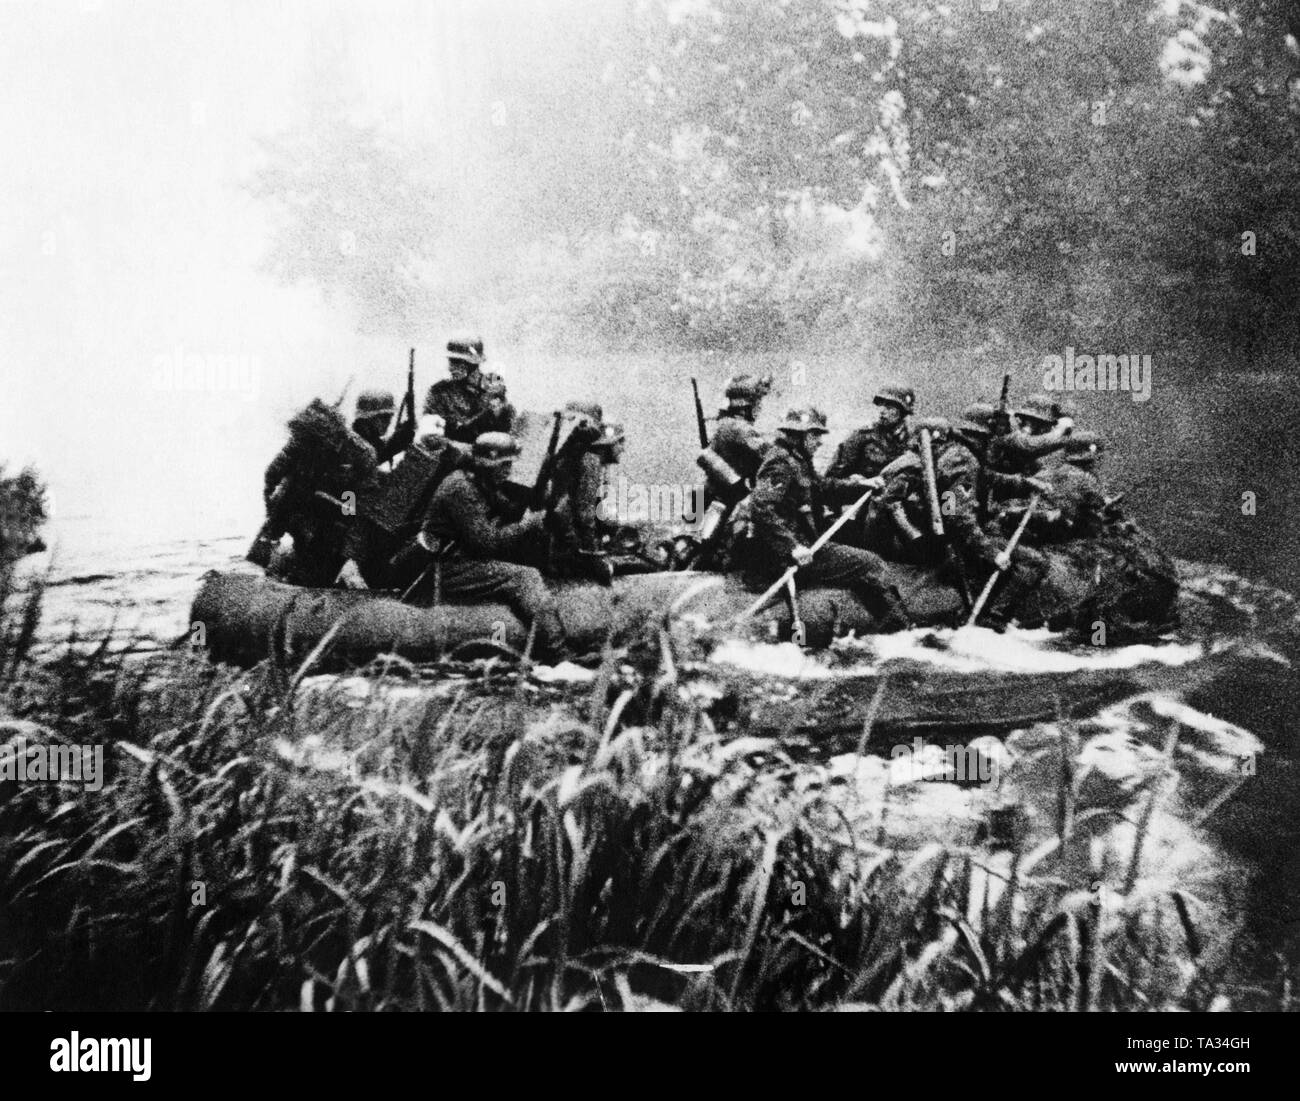 German signal troop (recognizable by the radio equipment of the men in center left) put a dinghy over a river. Probably a moviestill from Sieg im Westen (Victory in the West). Stock Photo